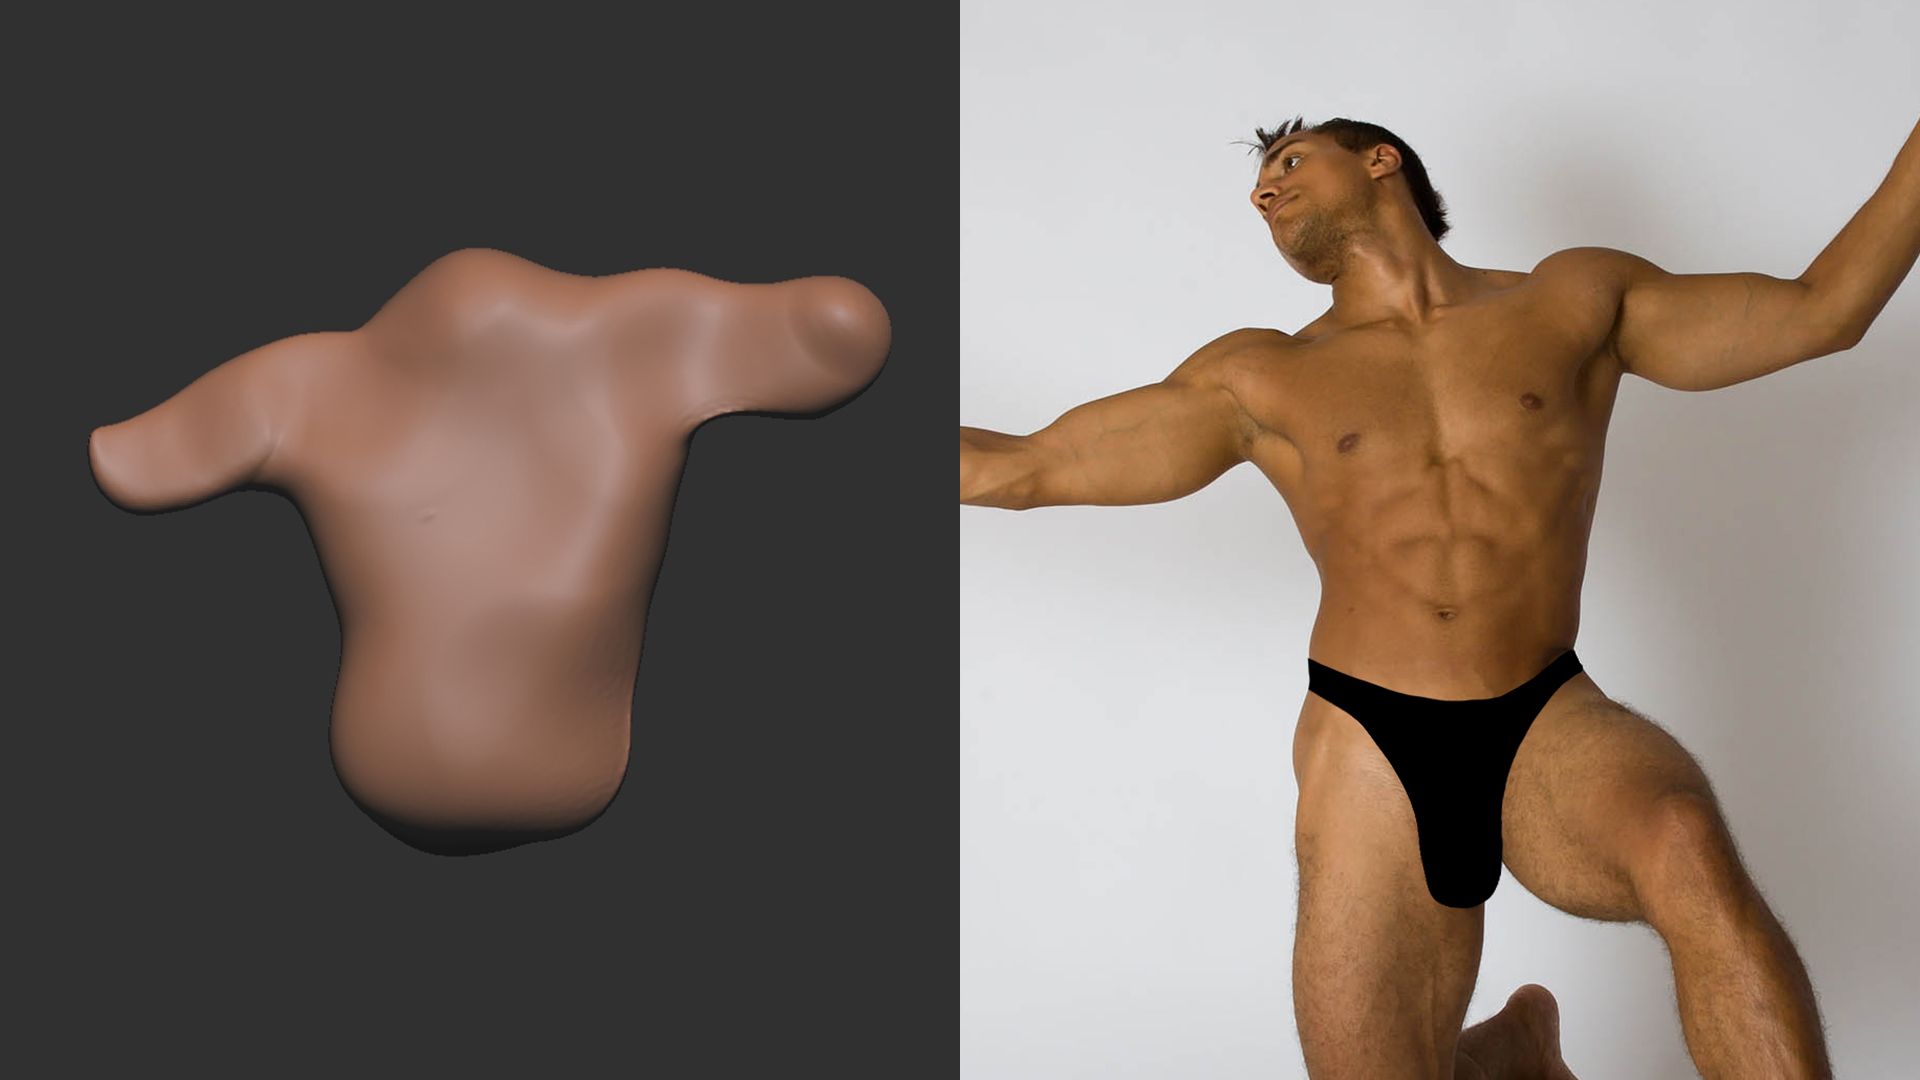 A Sculpted Model on the Left, Matching the Pose of a Male Model on the Right